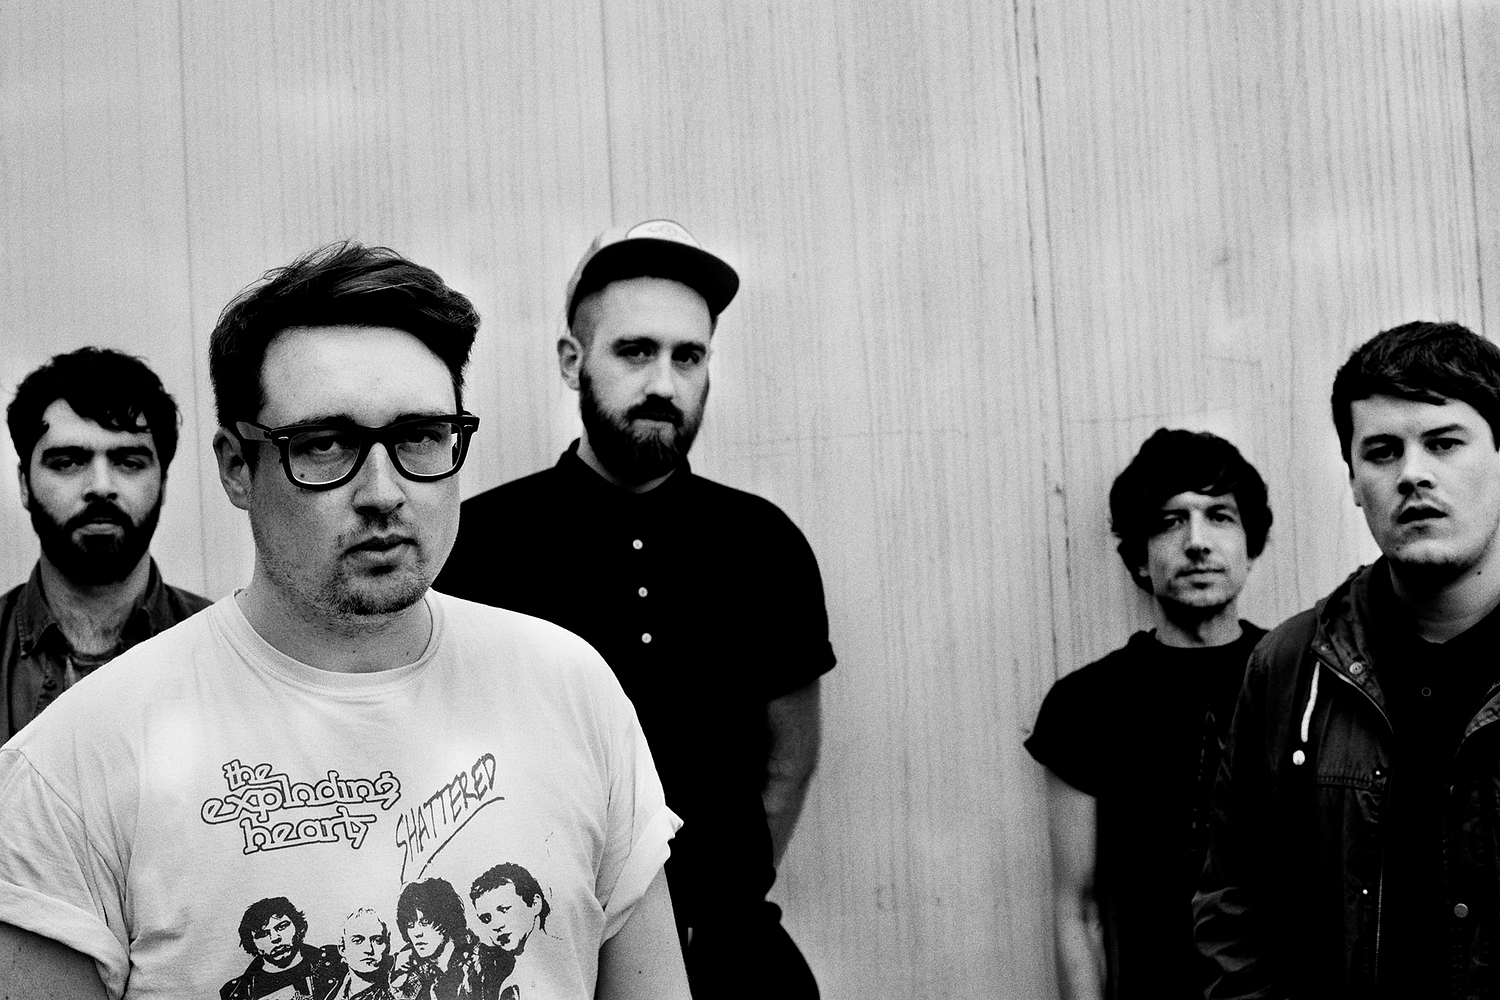 Hookworms: "Our new album's a bit more upbeat, it sounds like us but with the fat trimmed"